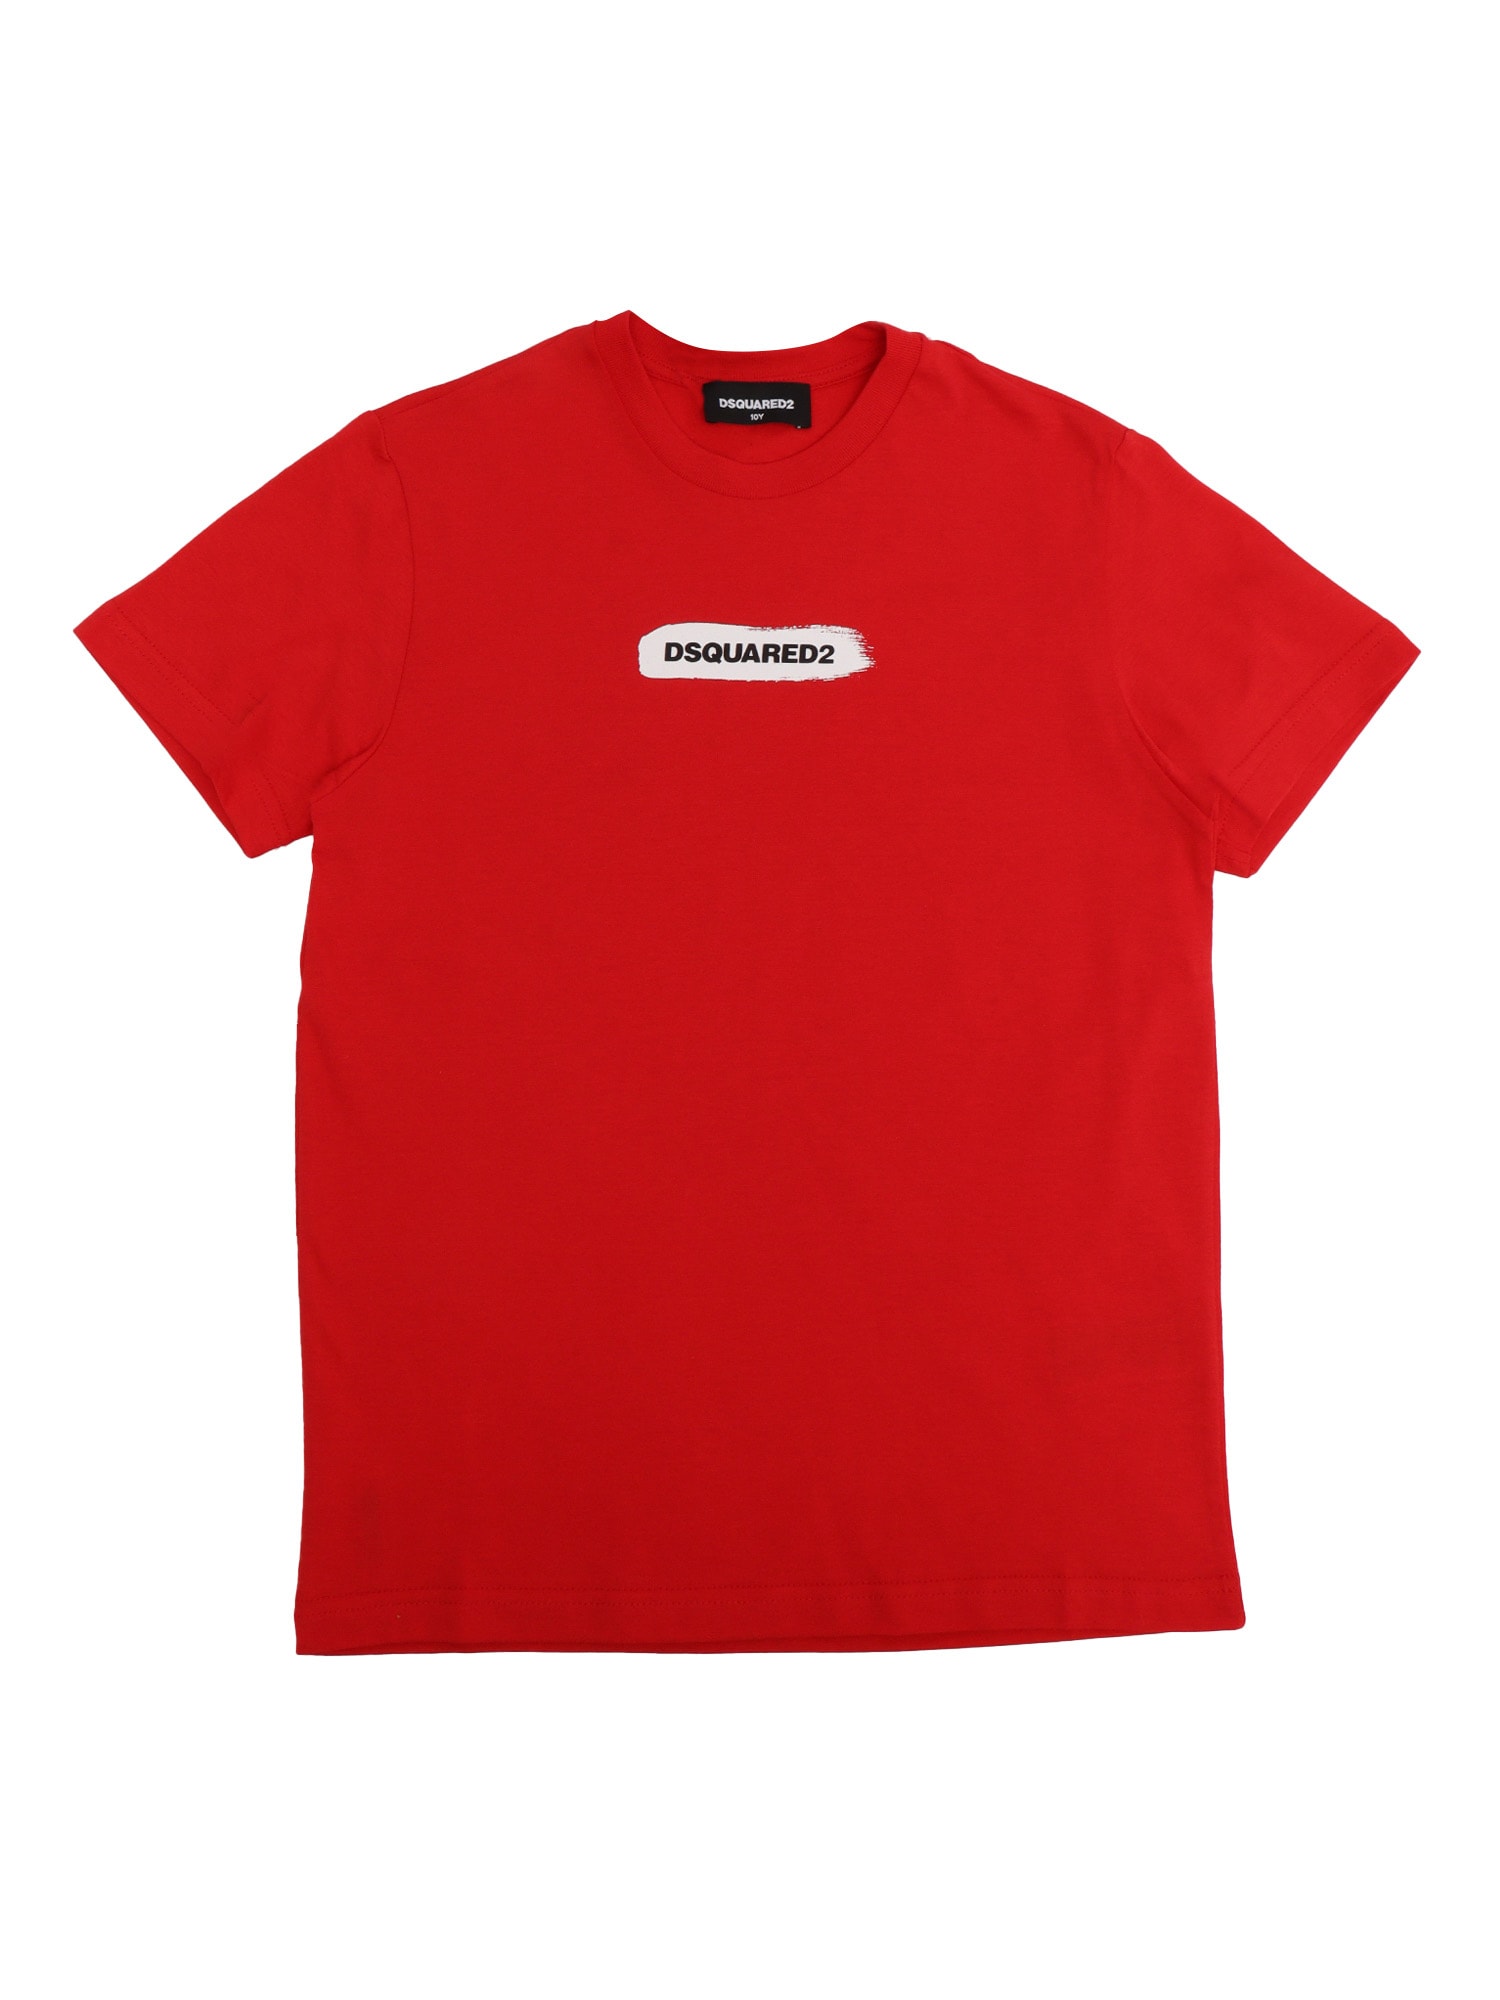 Shop Dsquared2 D-squared2 T-shirt In Red